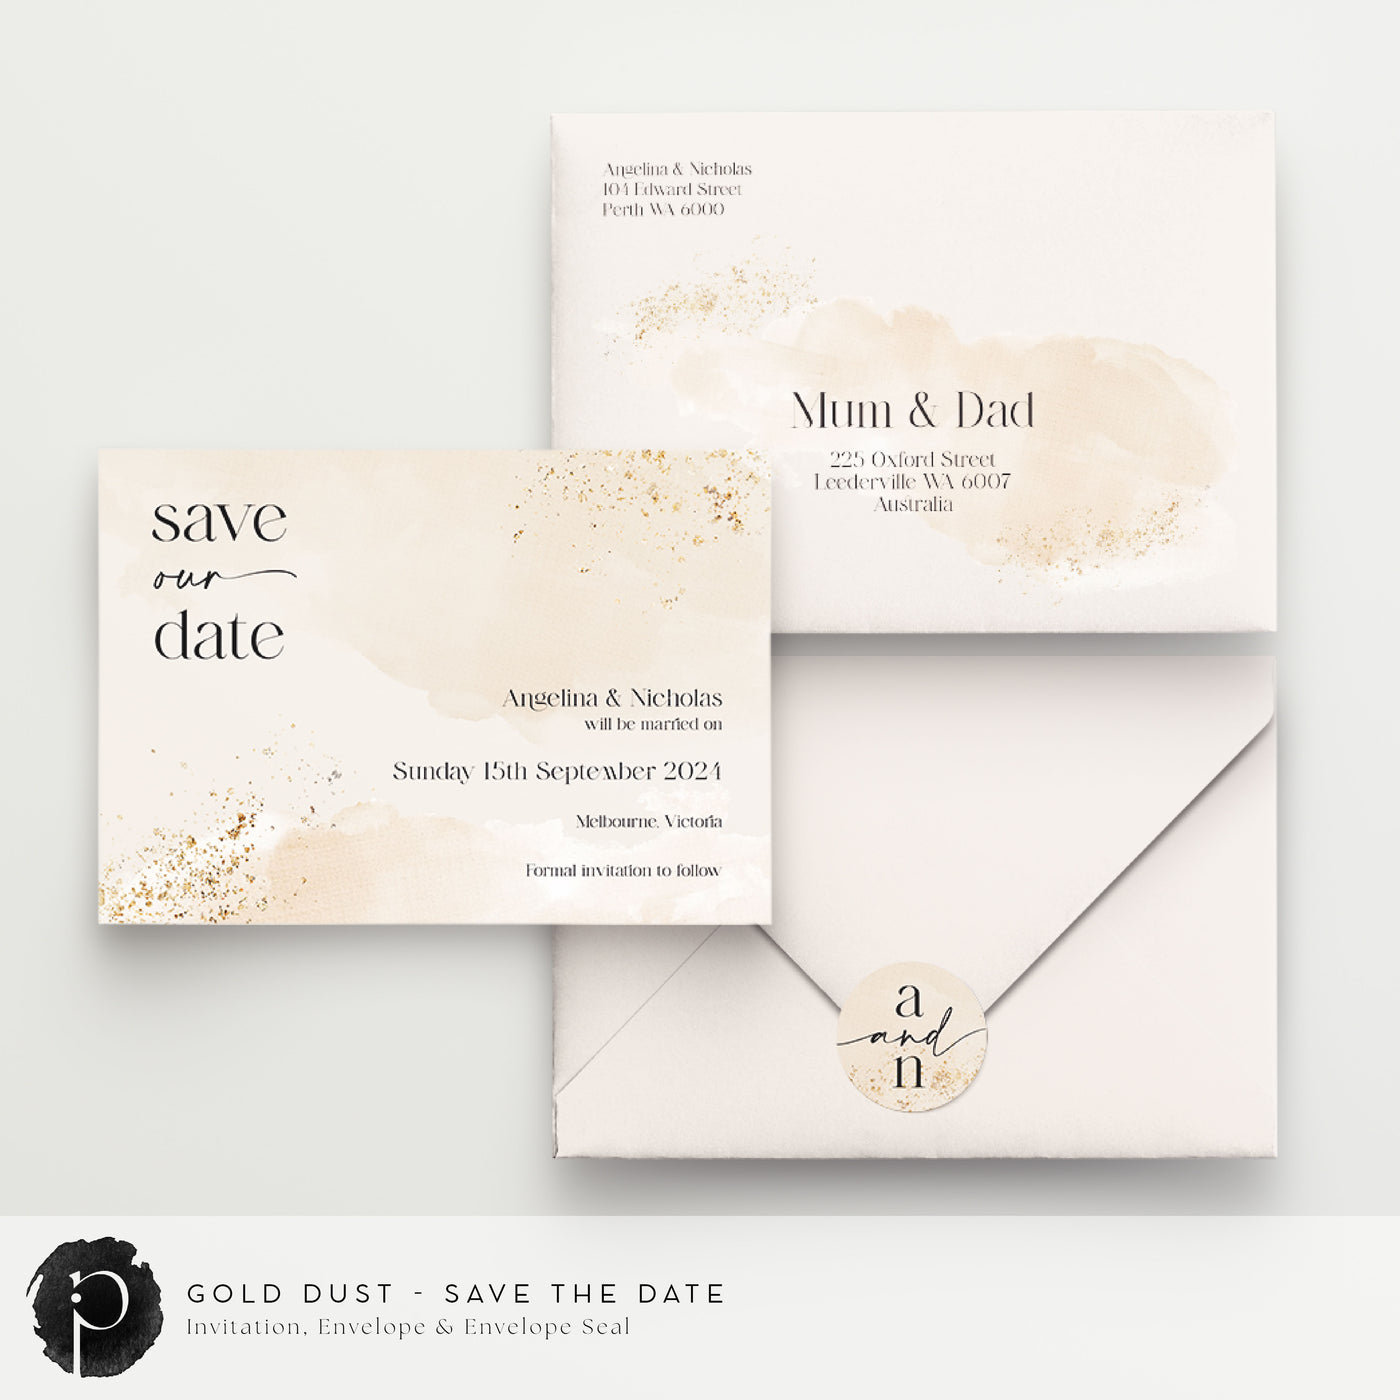 Gold Dust - Save The Date Cards